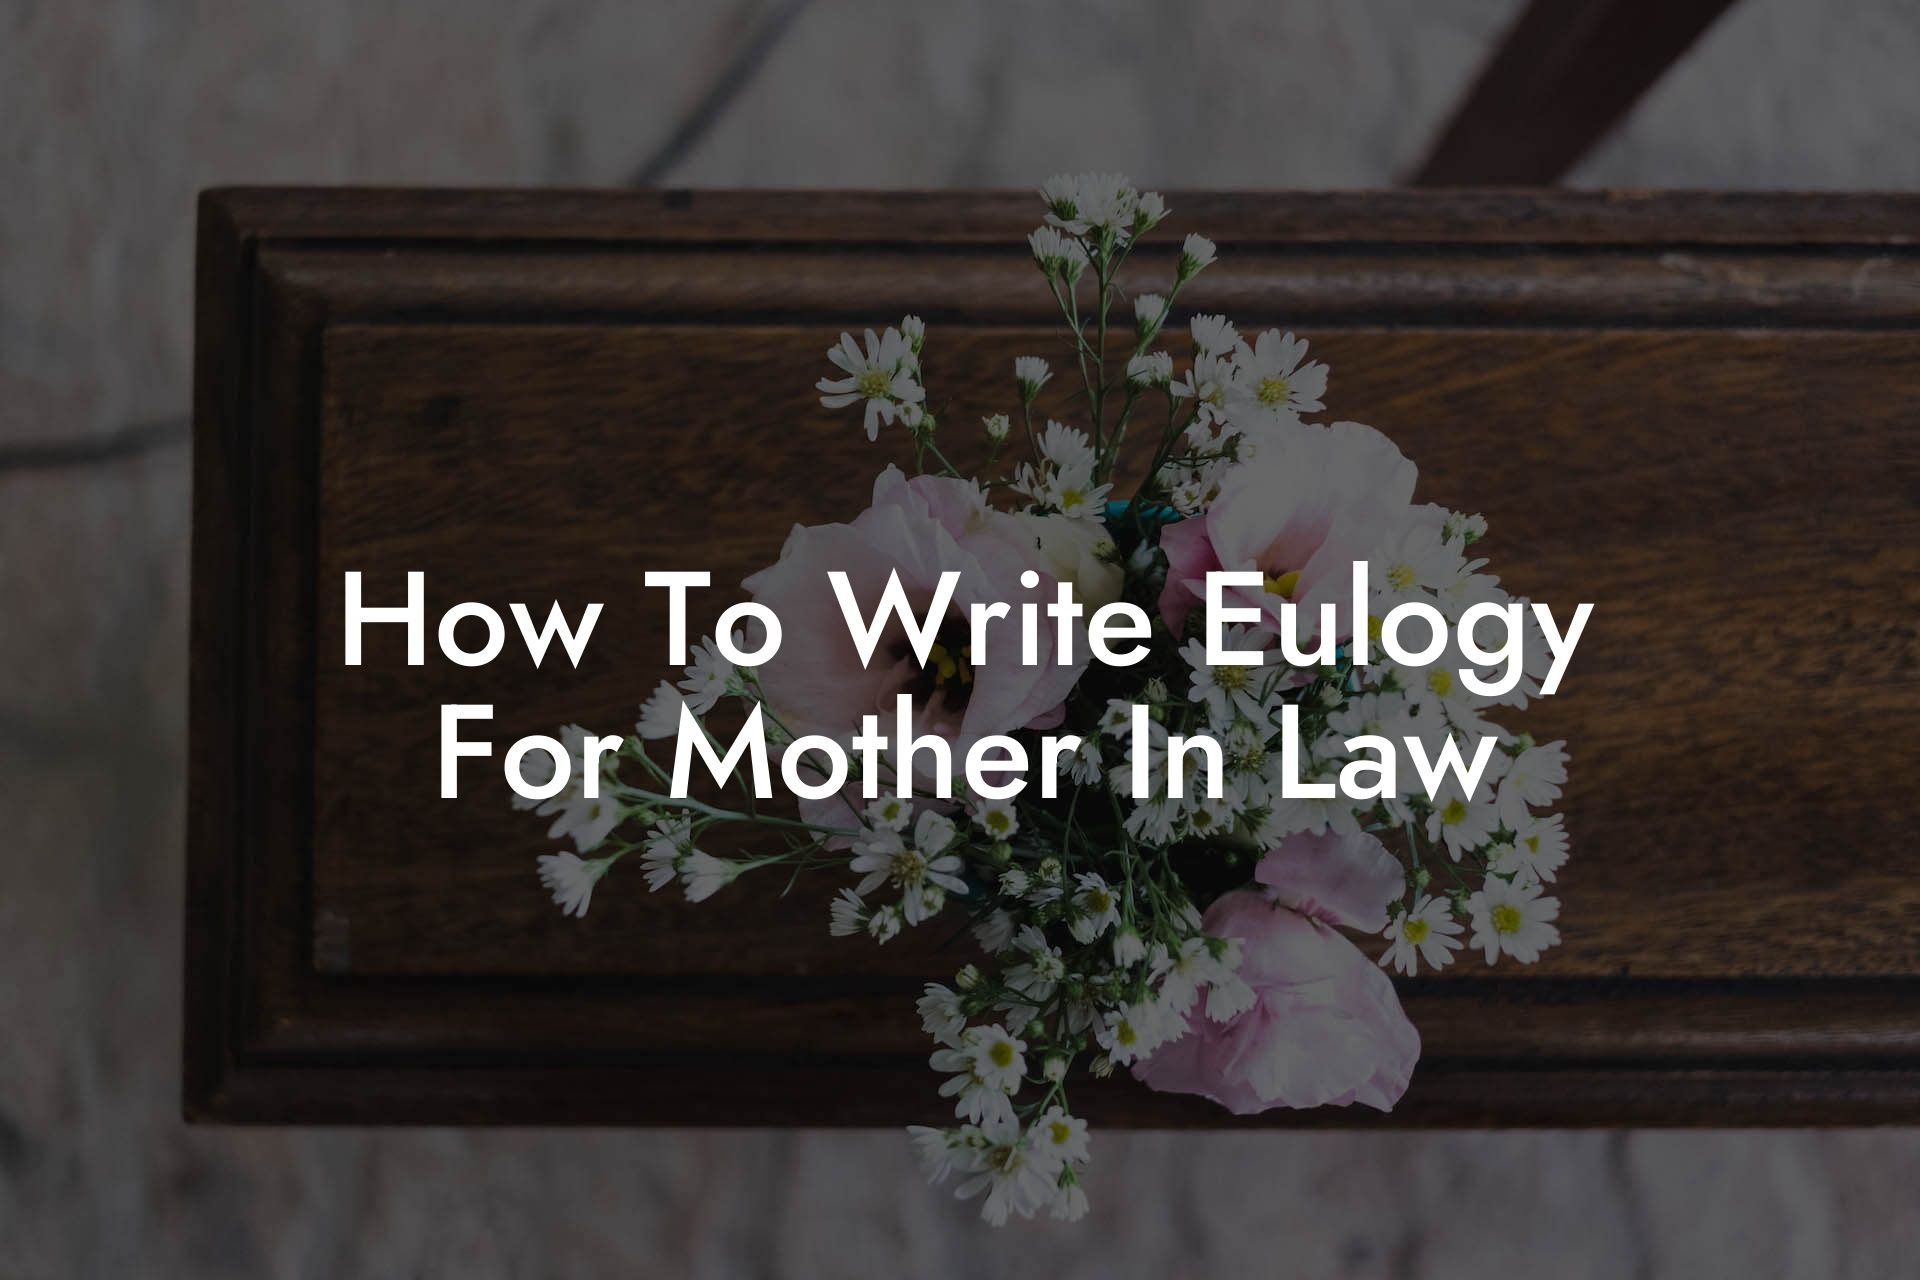 How To Write Eulogy For Mother In Law